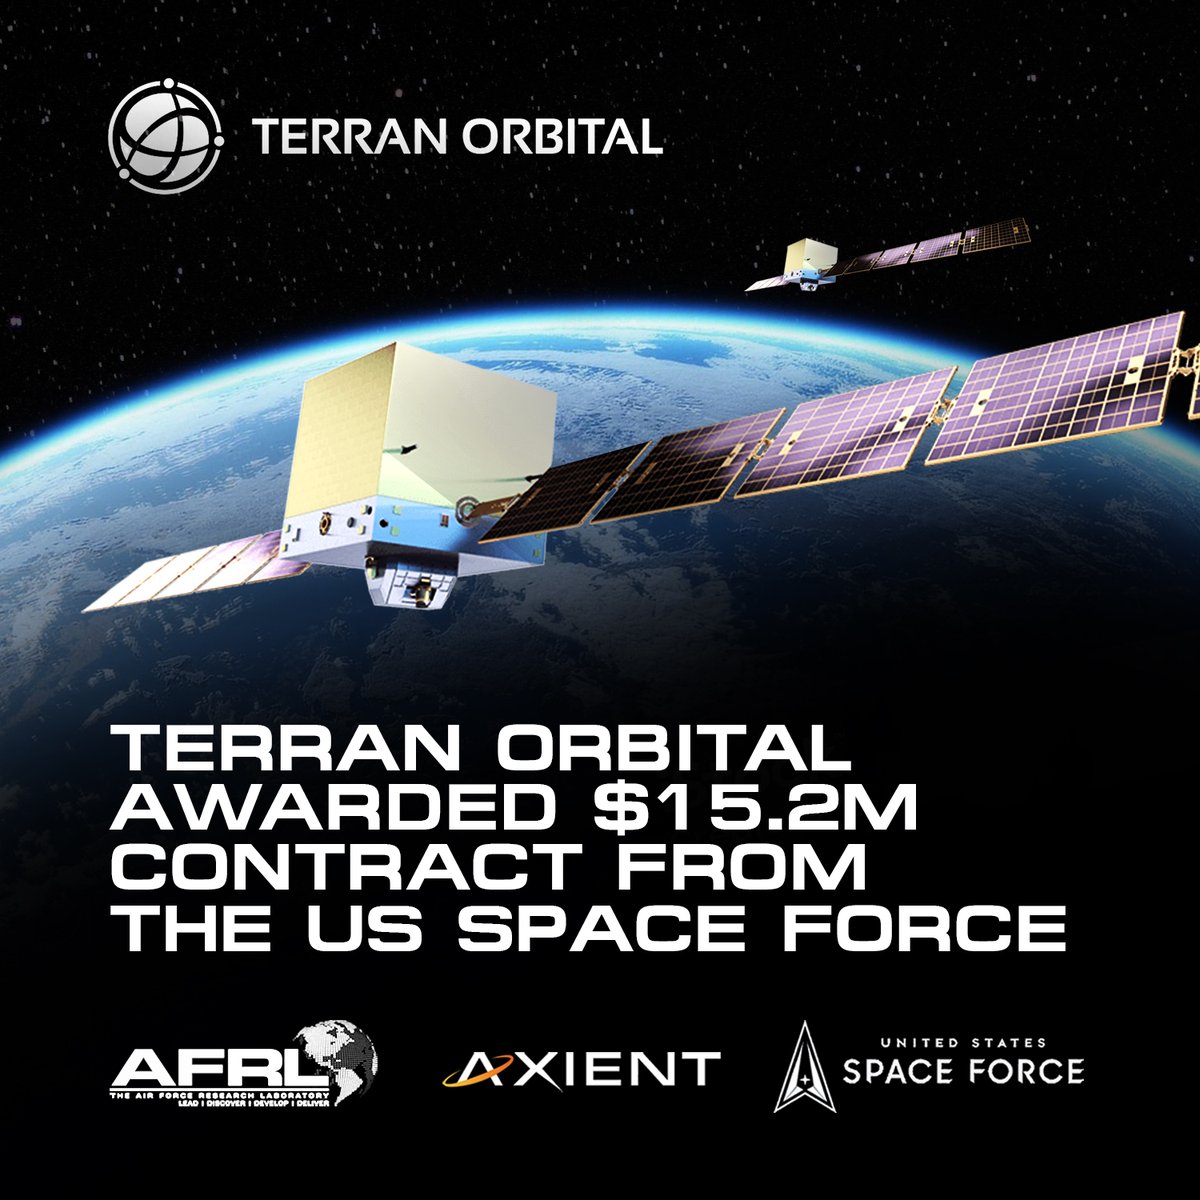 @TerranOrbital was awarded a $15.2 million contract to supply Ambassador Class satellite platforms complete with solar arrays and support equipment to the Air Force Research Laboratory AFRL. zurl.co/vuG5 #TerranOrbital #SpaceForce #AFRL #Axient #Award #Satellite